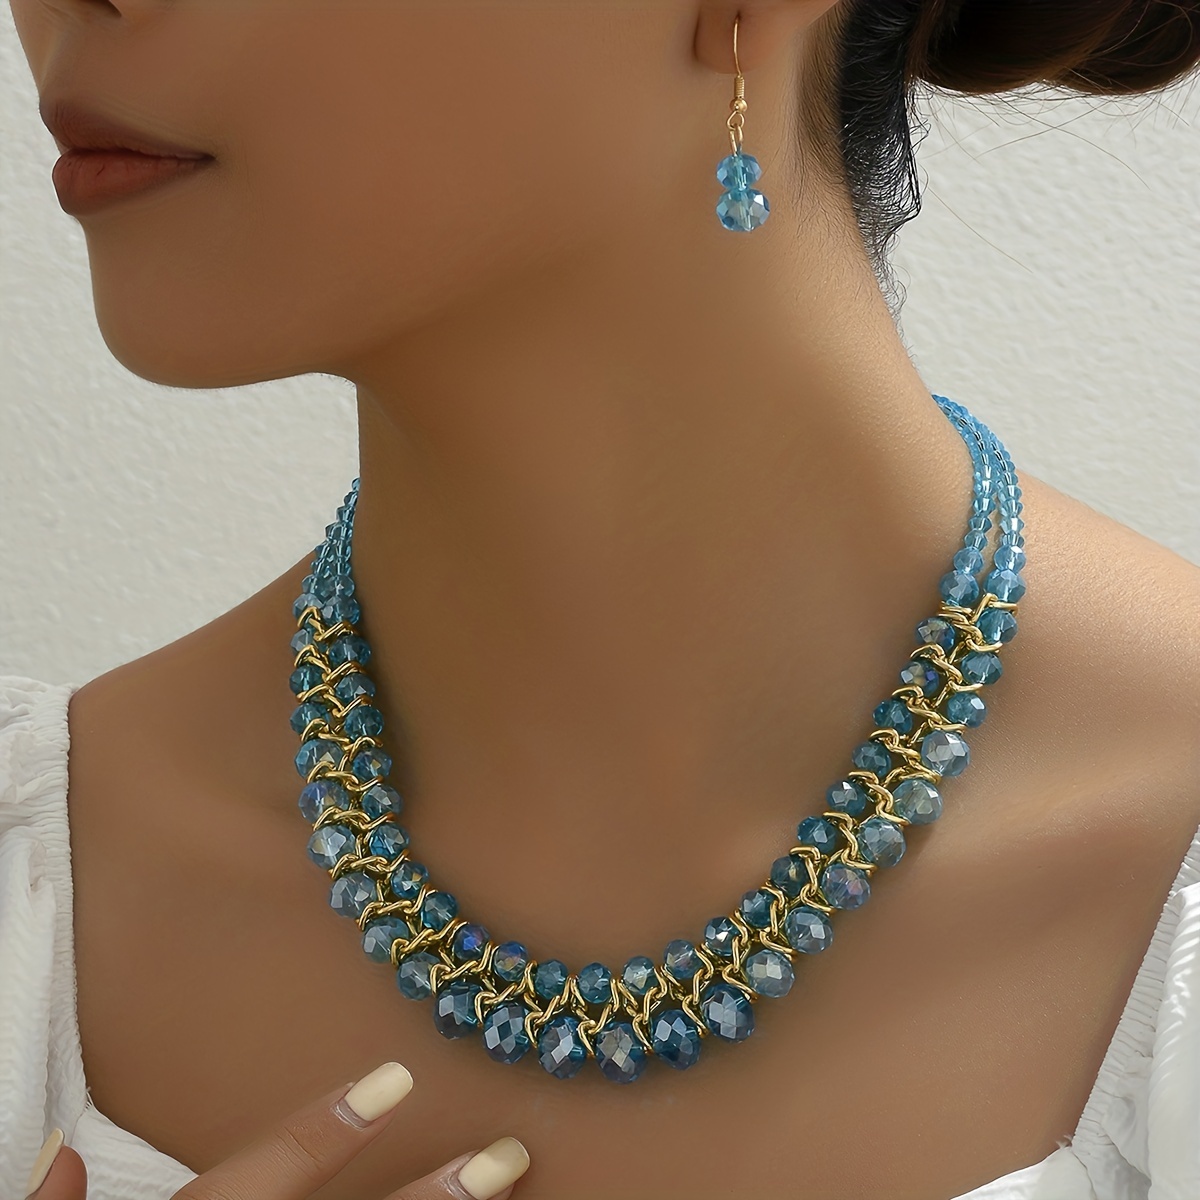 

1 Pair Of Earrings + 1 Necklace Boho Style Jewelry Set Made Of Artifical Crystals In Ocean Blue Color Match Daily Outfits Gift For Her